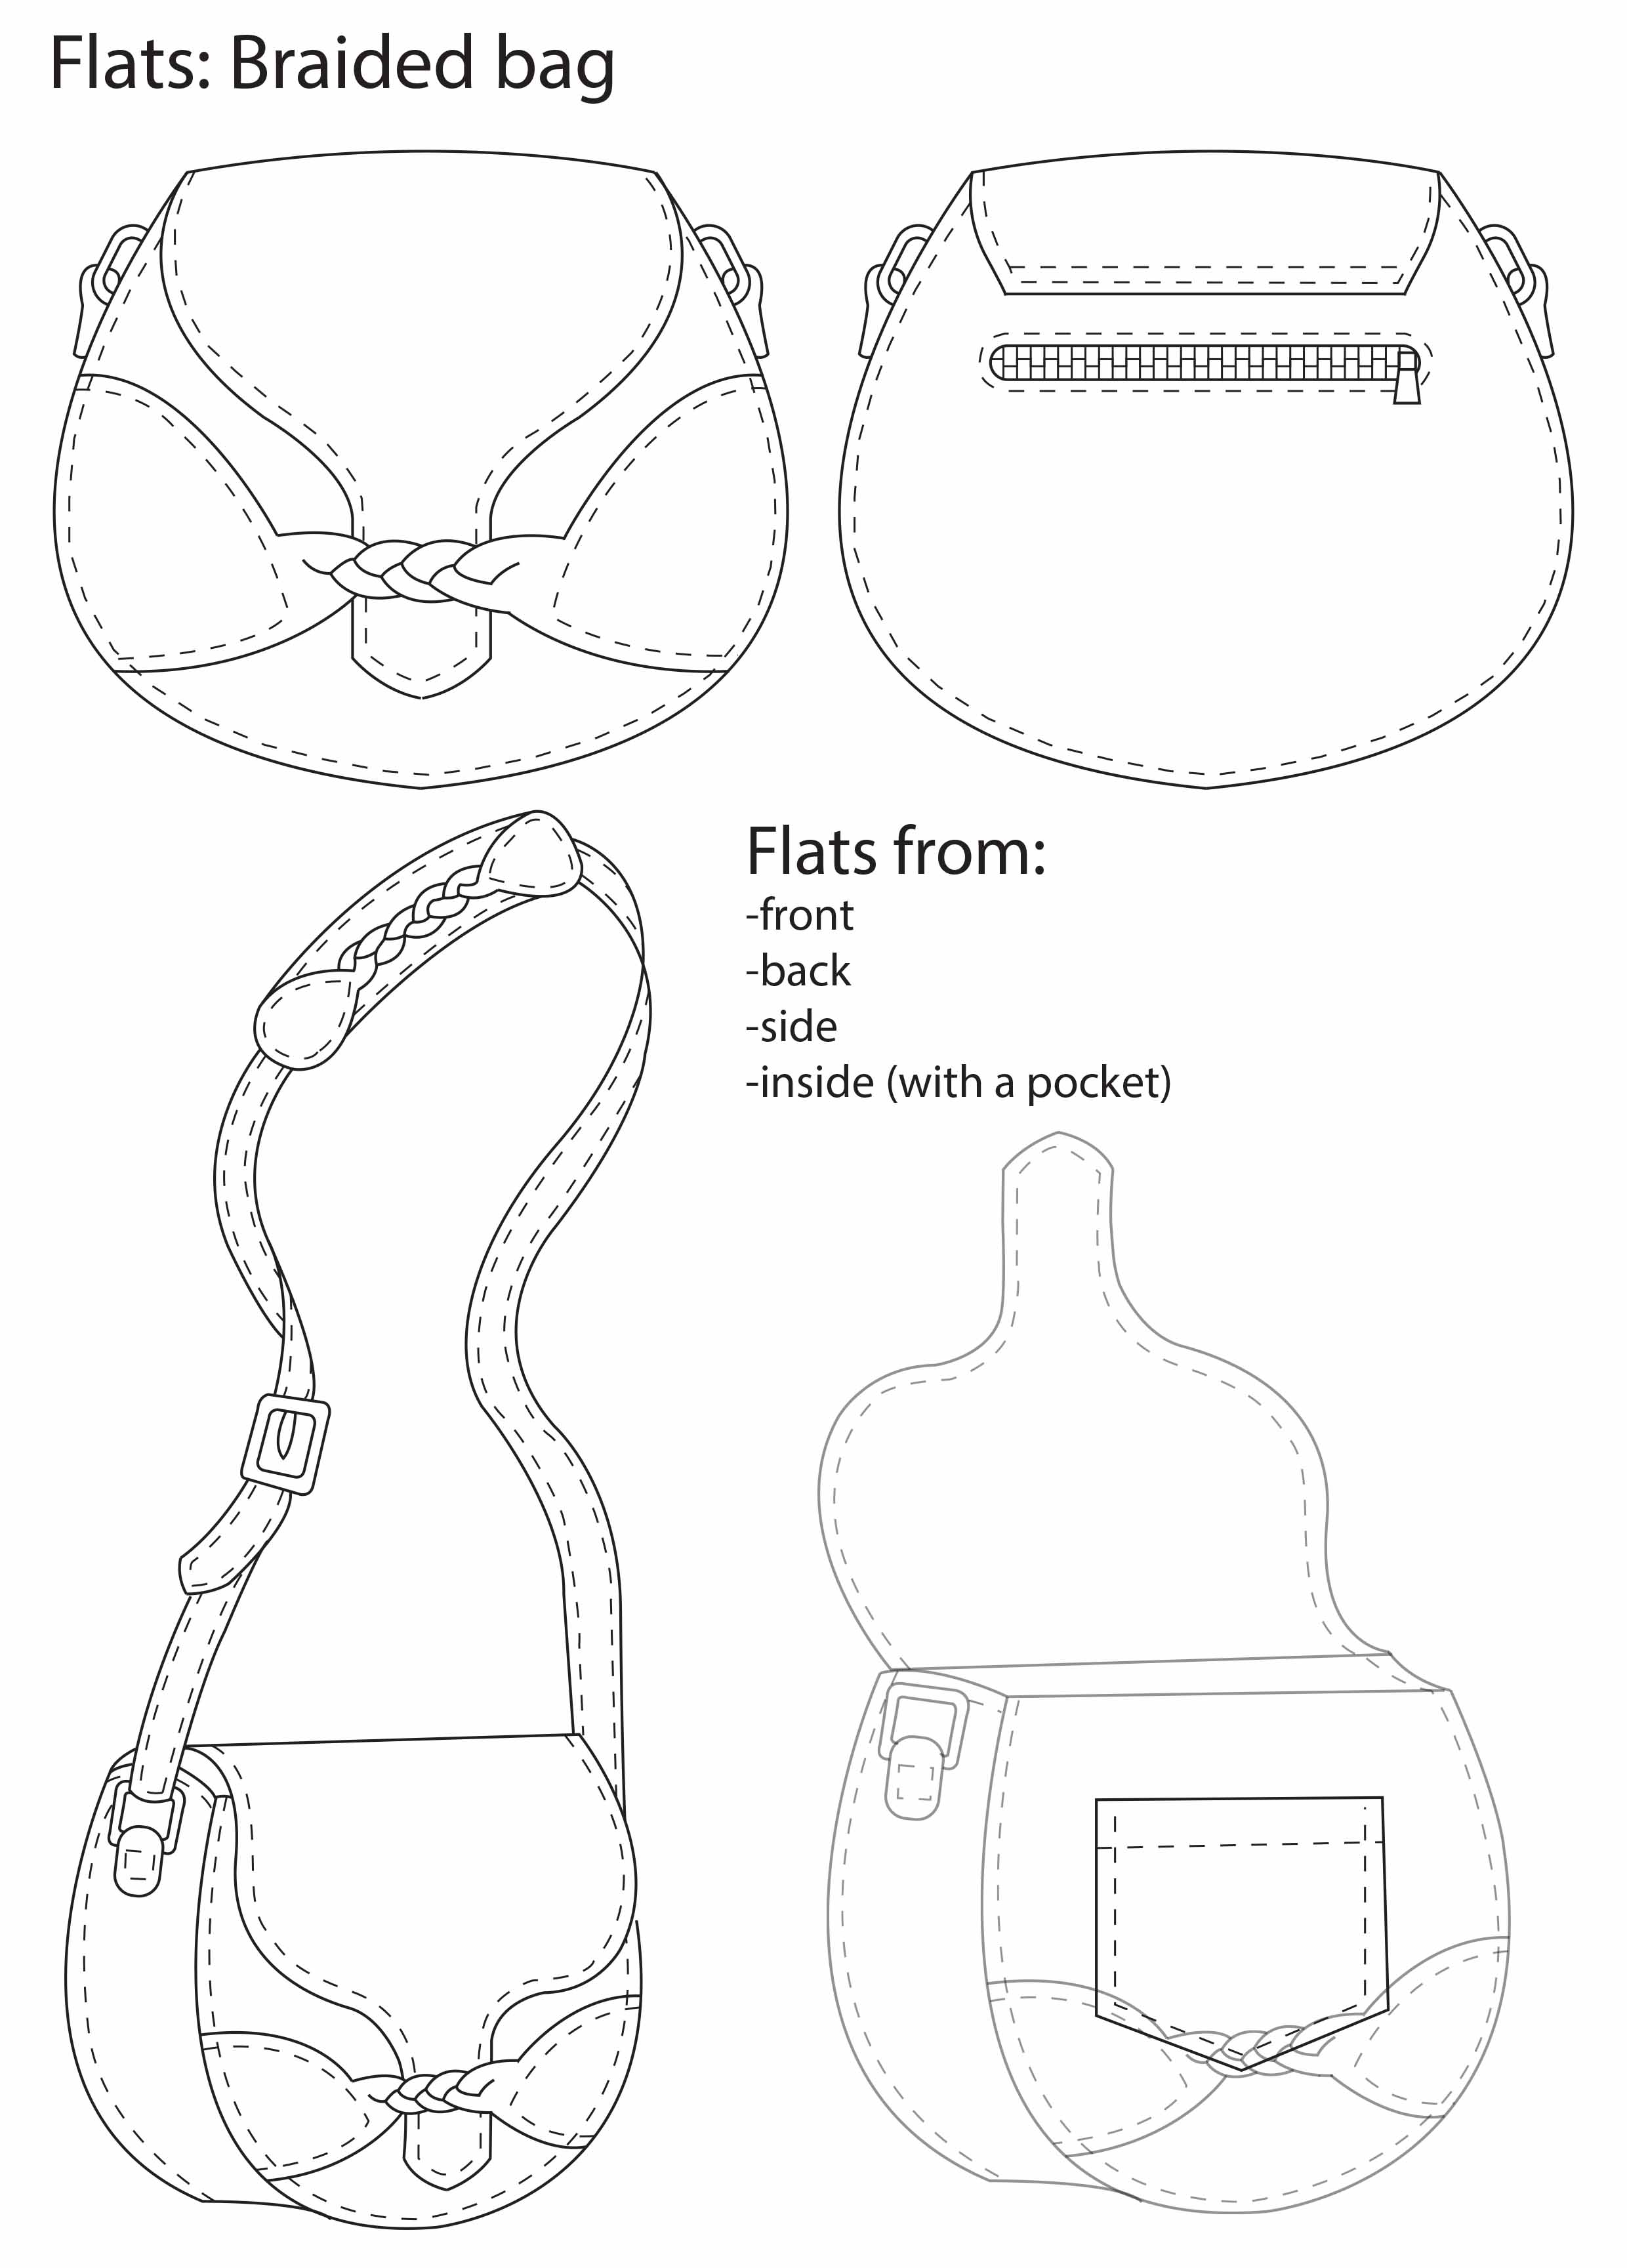 Entry: Braided bag – Real Leather Design Competitions